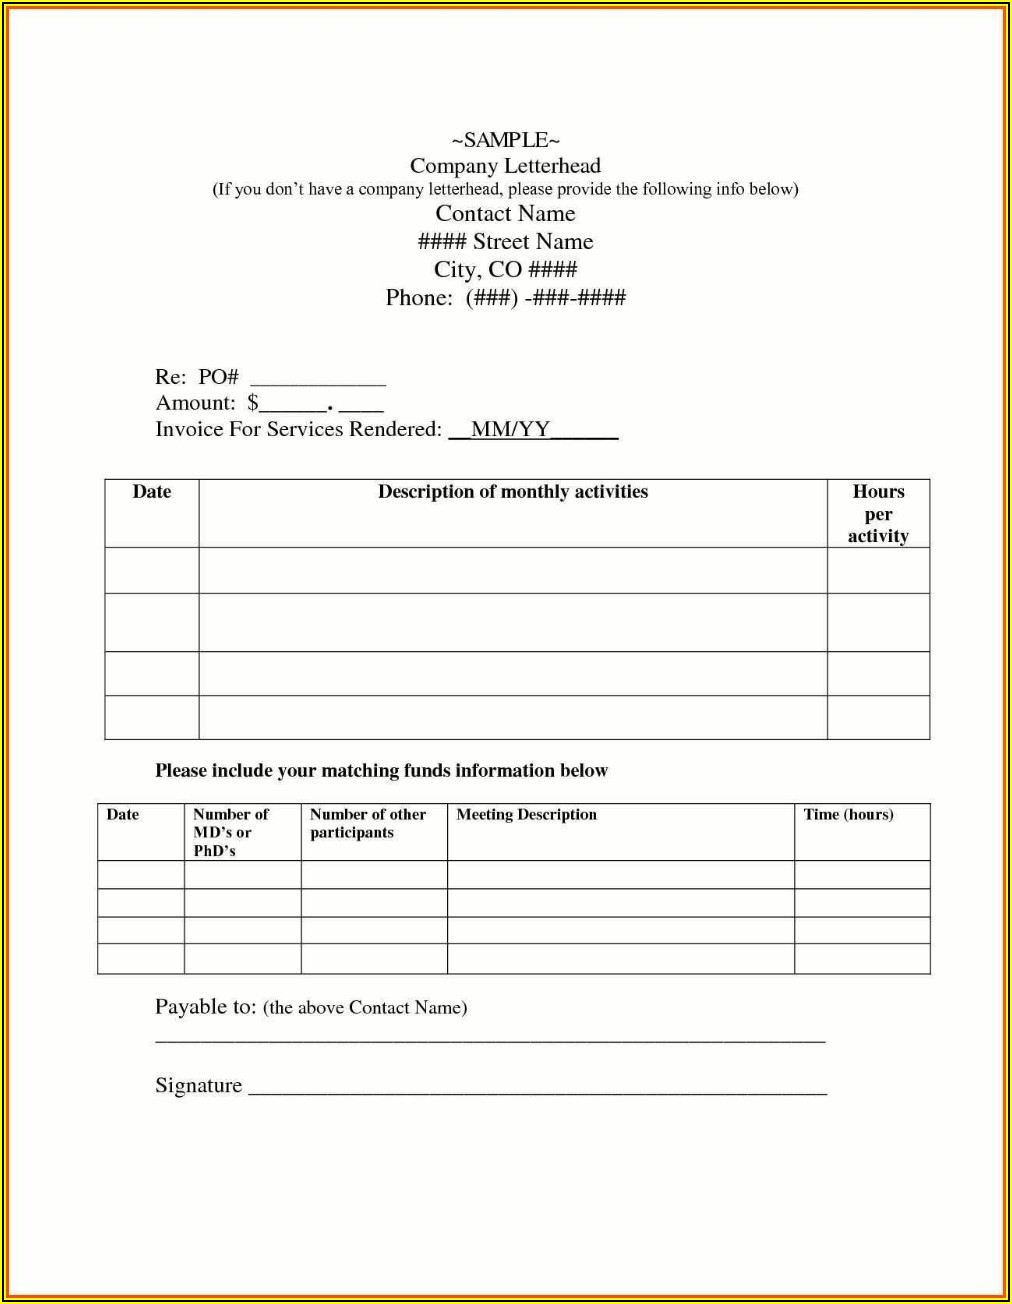 Contractor Receipt Template Free